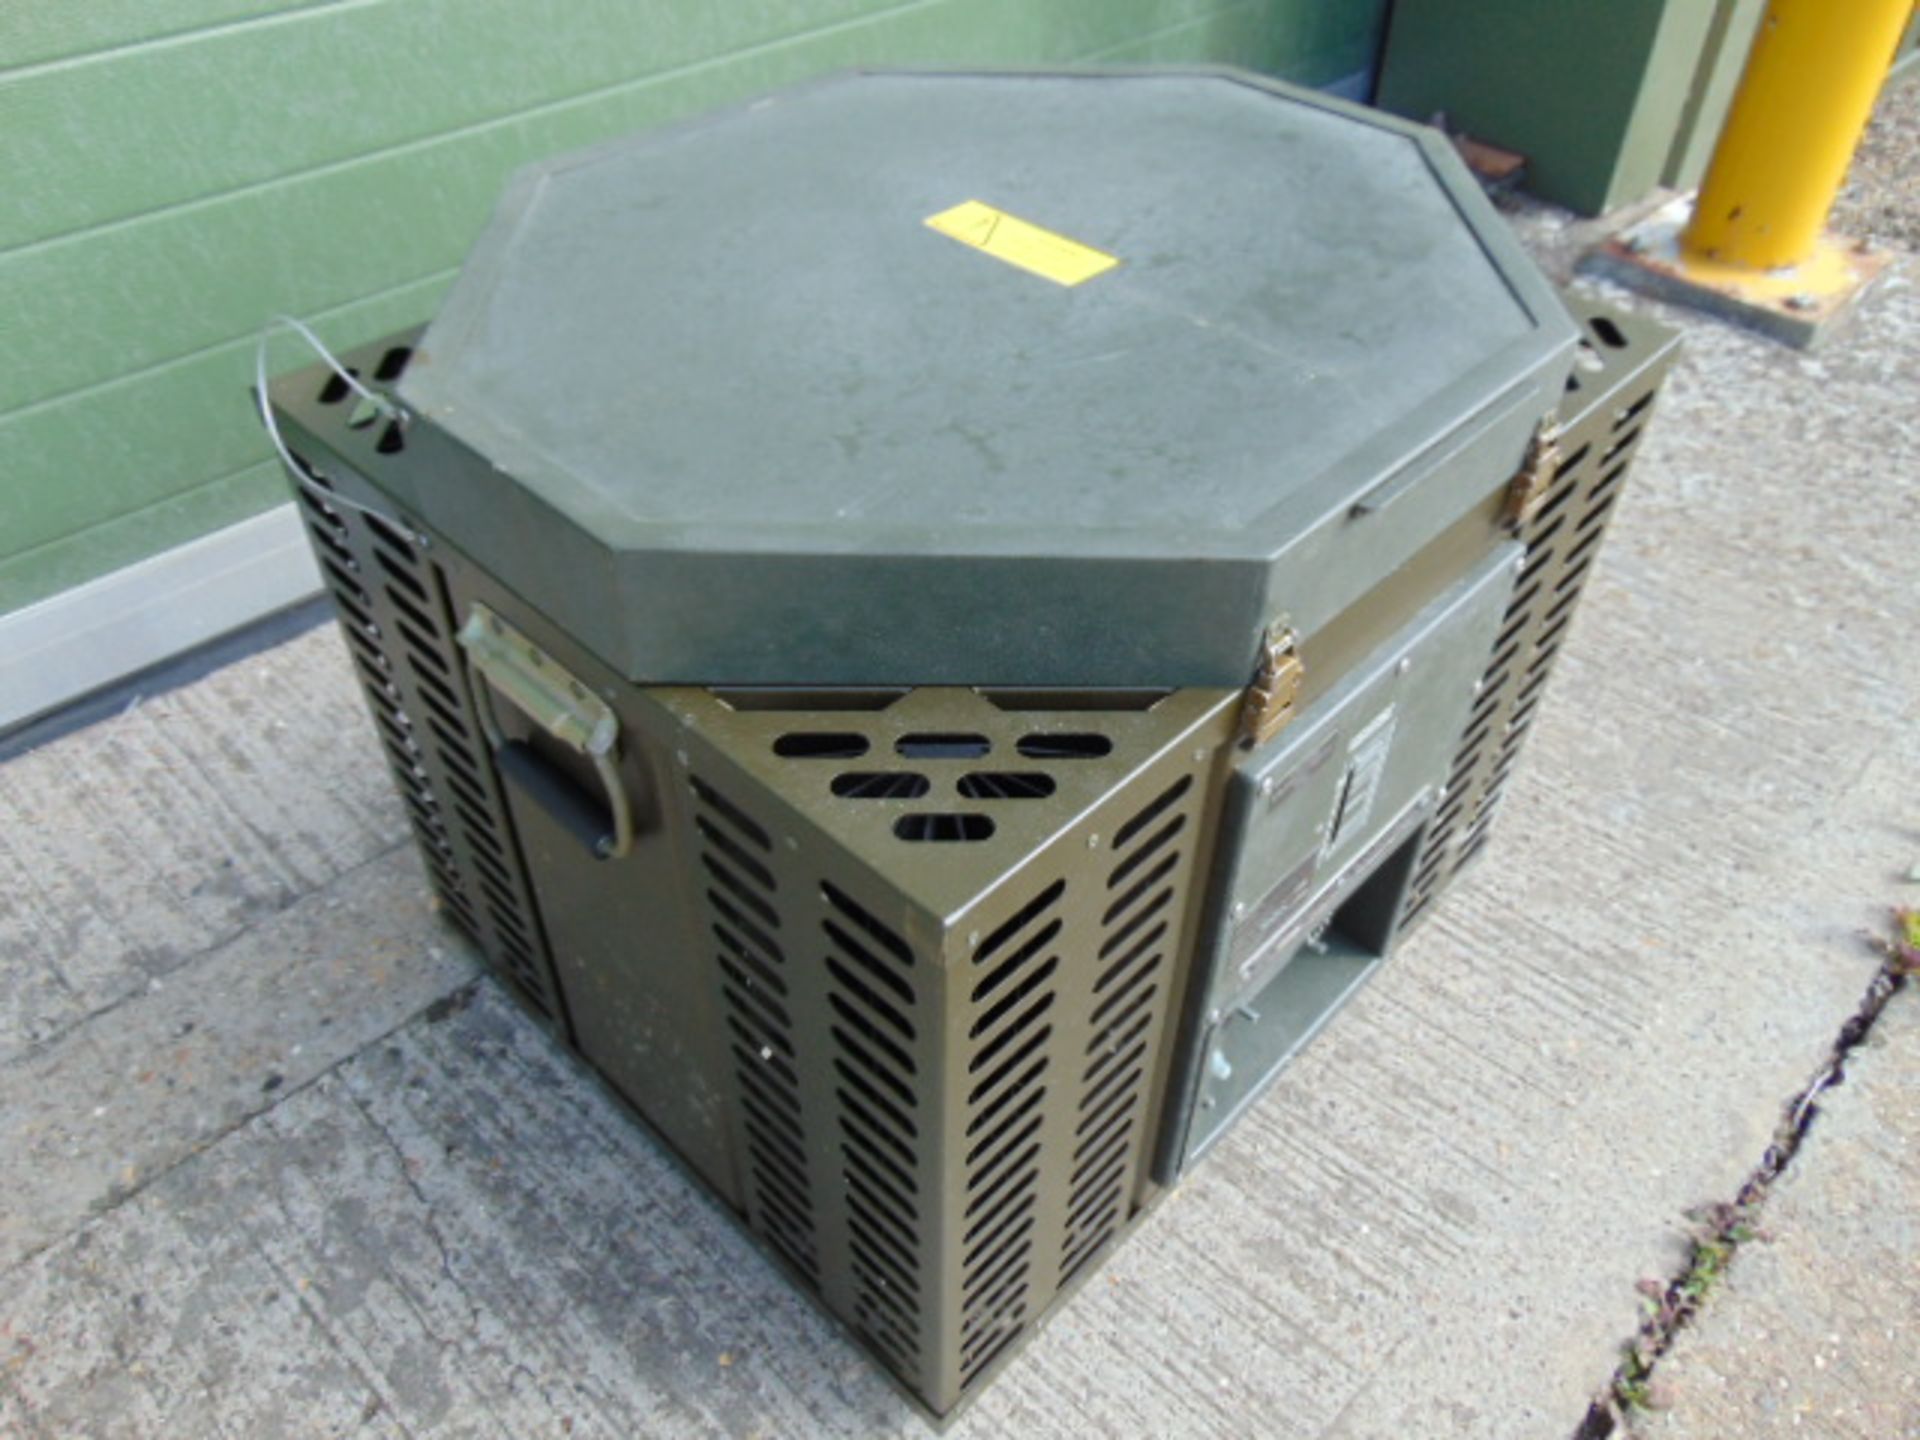 Thermopol M-50BT Refrigerator / Cooler - Image 8 of 8